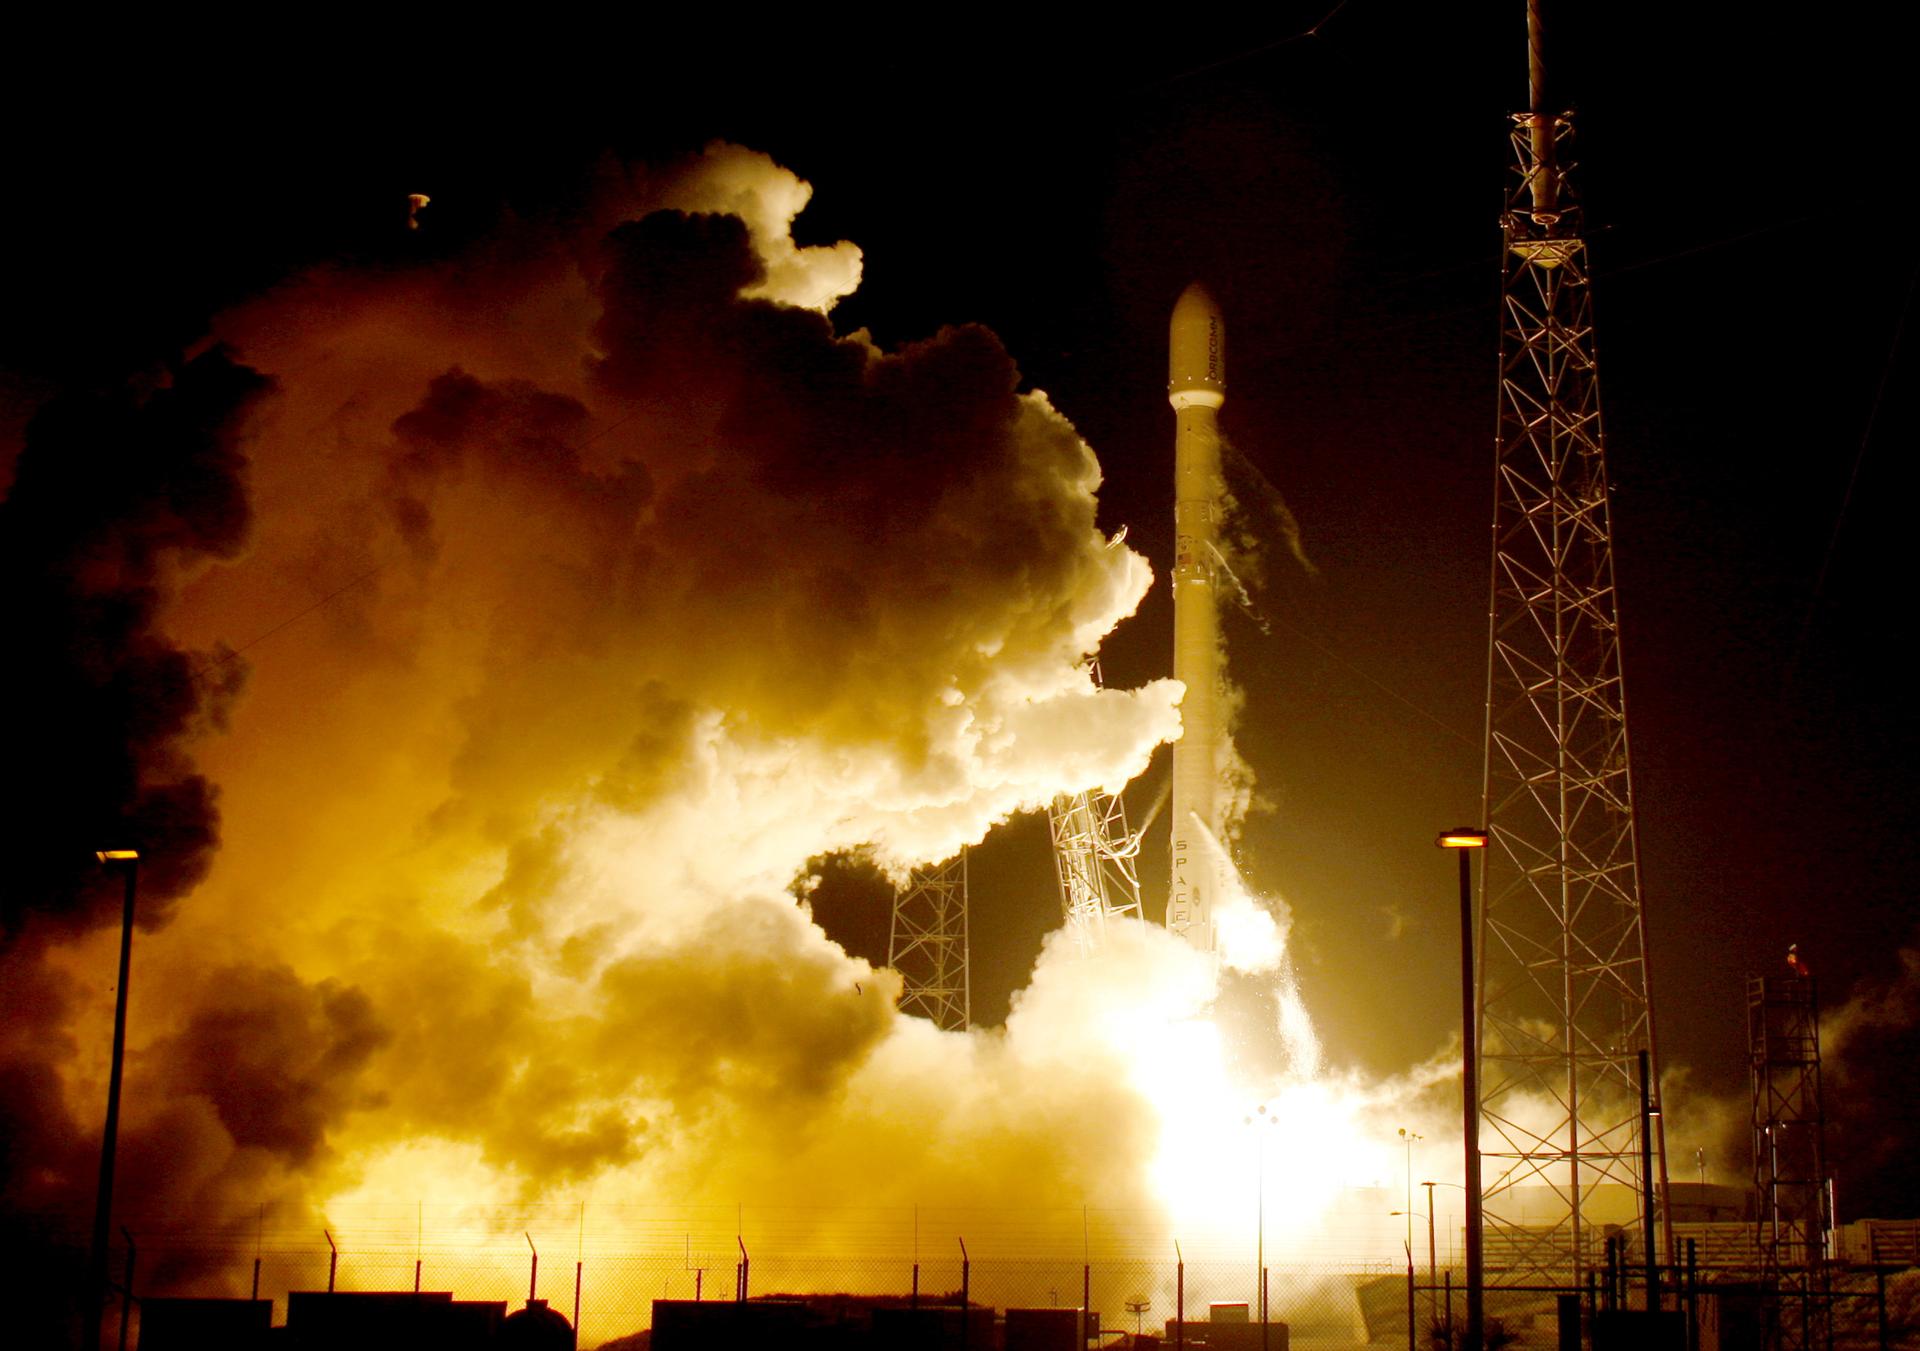 A remodeled version of the SpaceX Falcon 9 rocket lifts off at the Cape Canaveral Air Force Station on the launcher’s first mission since a June failure in Cape Canaveral, Florida, December 21, 2015. The rocket carried a payload of eleven satellites owned